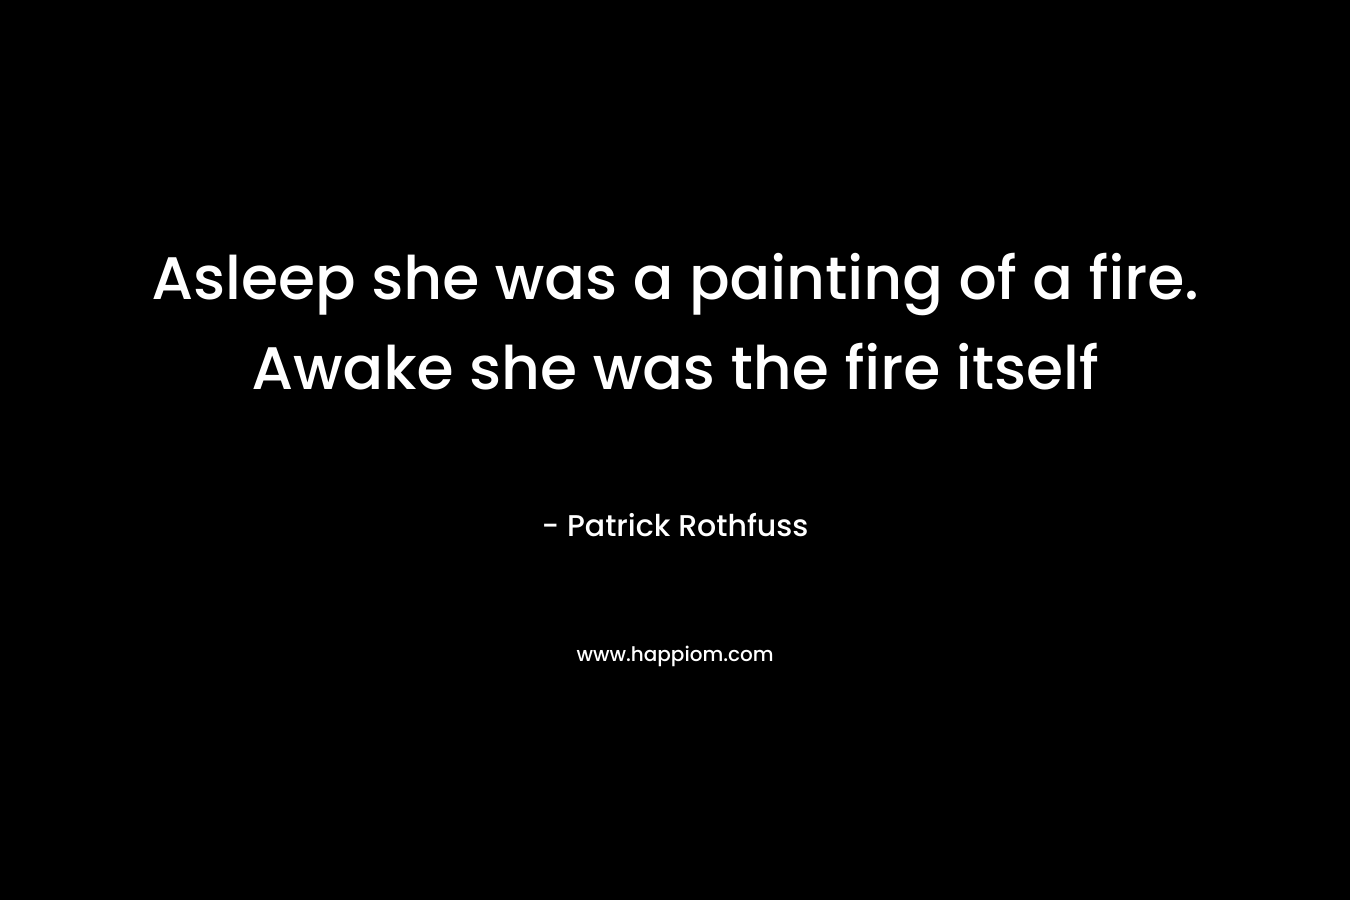 Asleep she was a painting of a fire. Awake she was the fire itself – Patrick Rothfuss